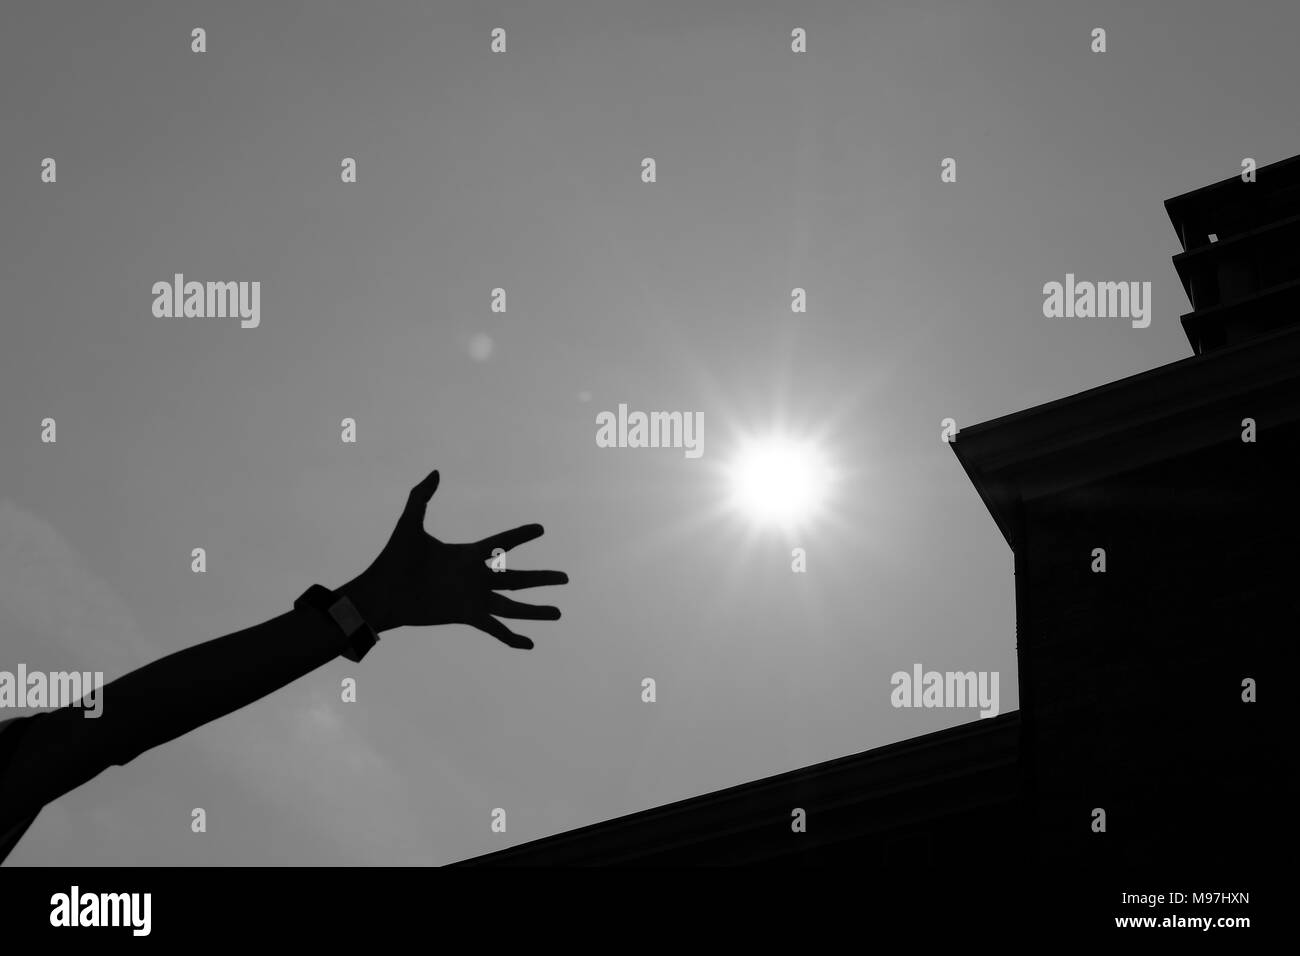 Woman reaching out her hand Black and White Stock Photos & Images - Alamy